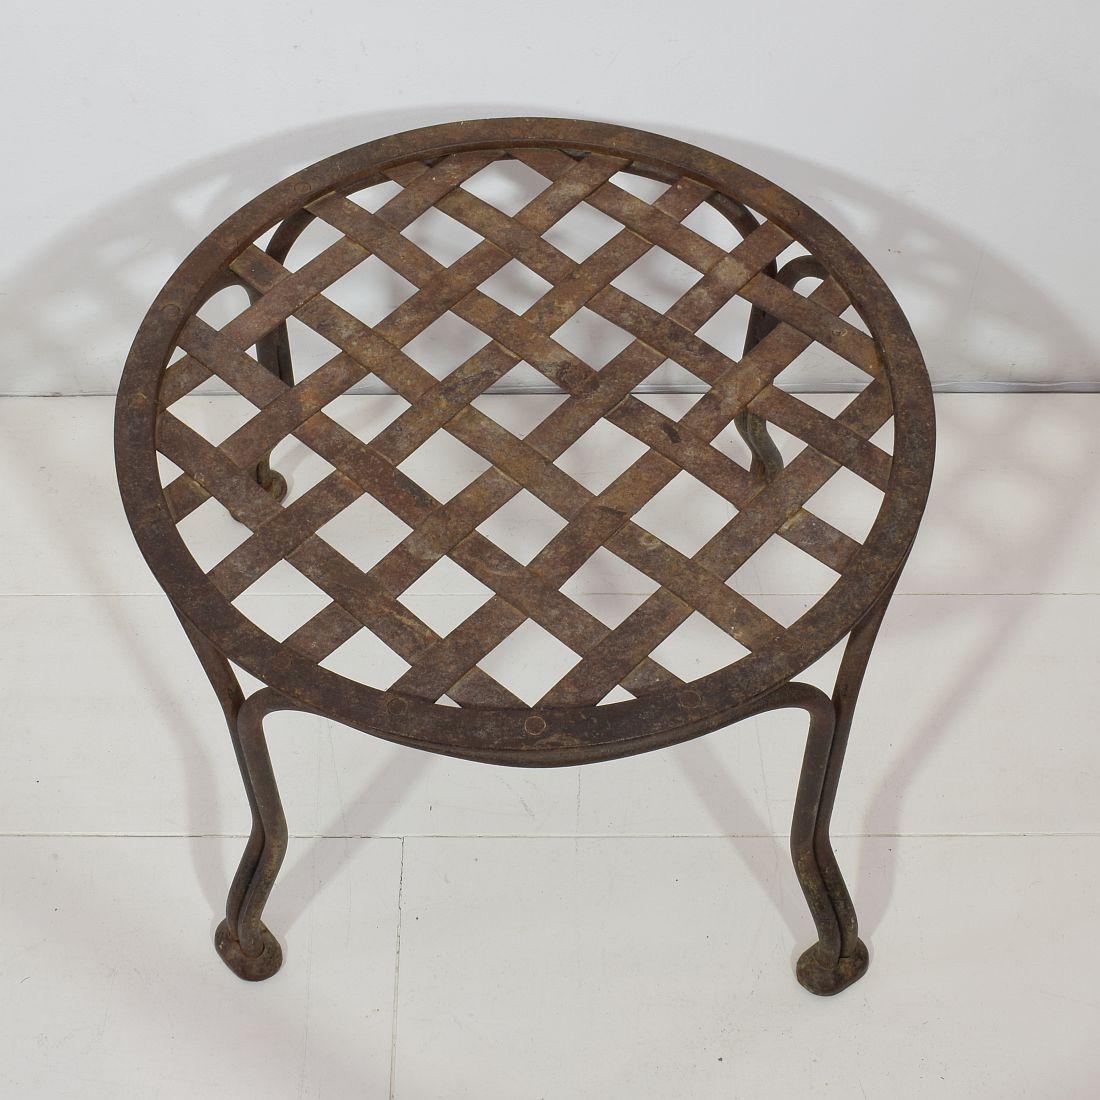 French Mid-20th Century Iron Stool or Tabouret For Sale 4